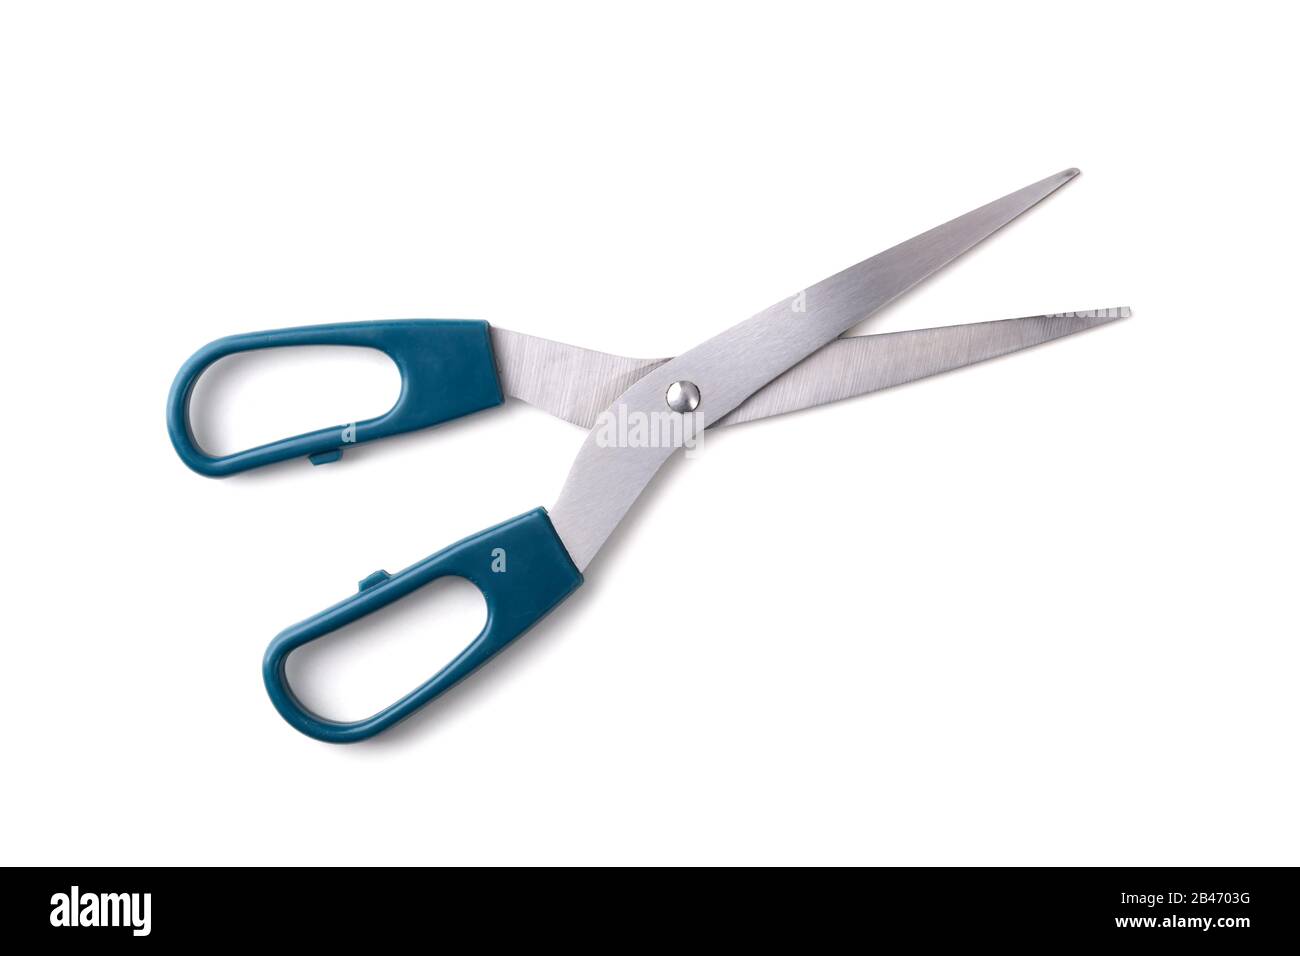 Scissors with green handle isolated on white Stock Photo